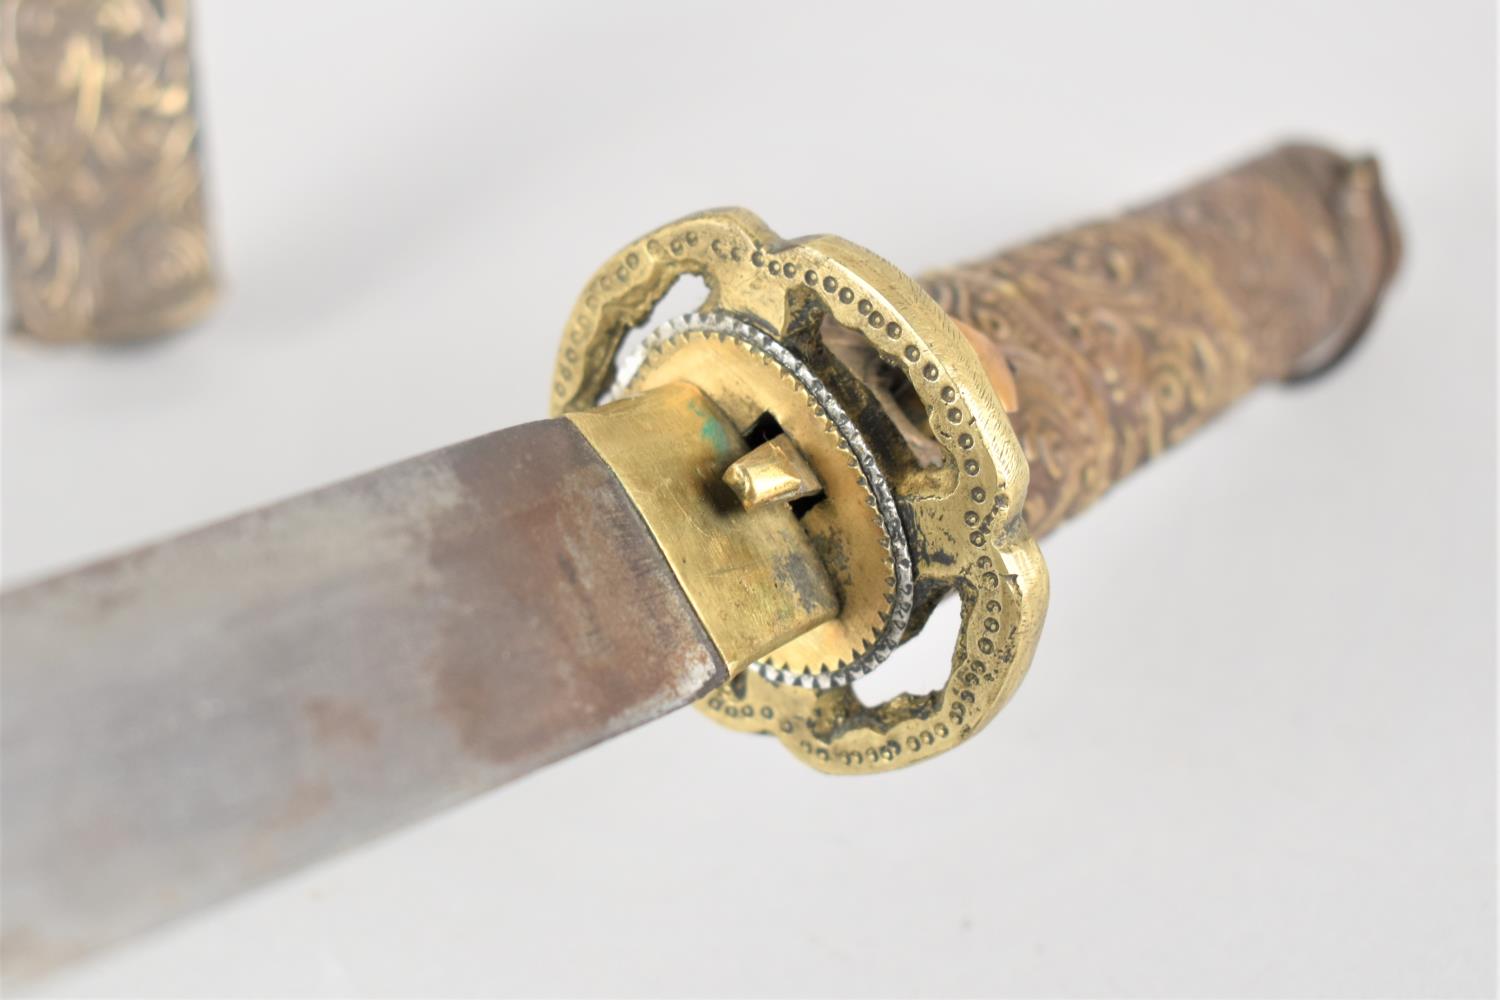 A Vintage Japanese Tanto with Brass Hilt and Scabbard decorated in Floral Motif, Steel Blade, - Image 3 of 4